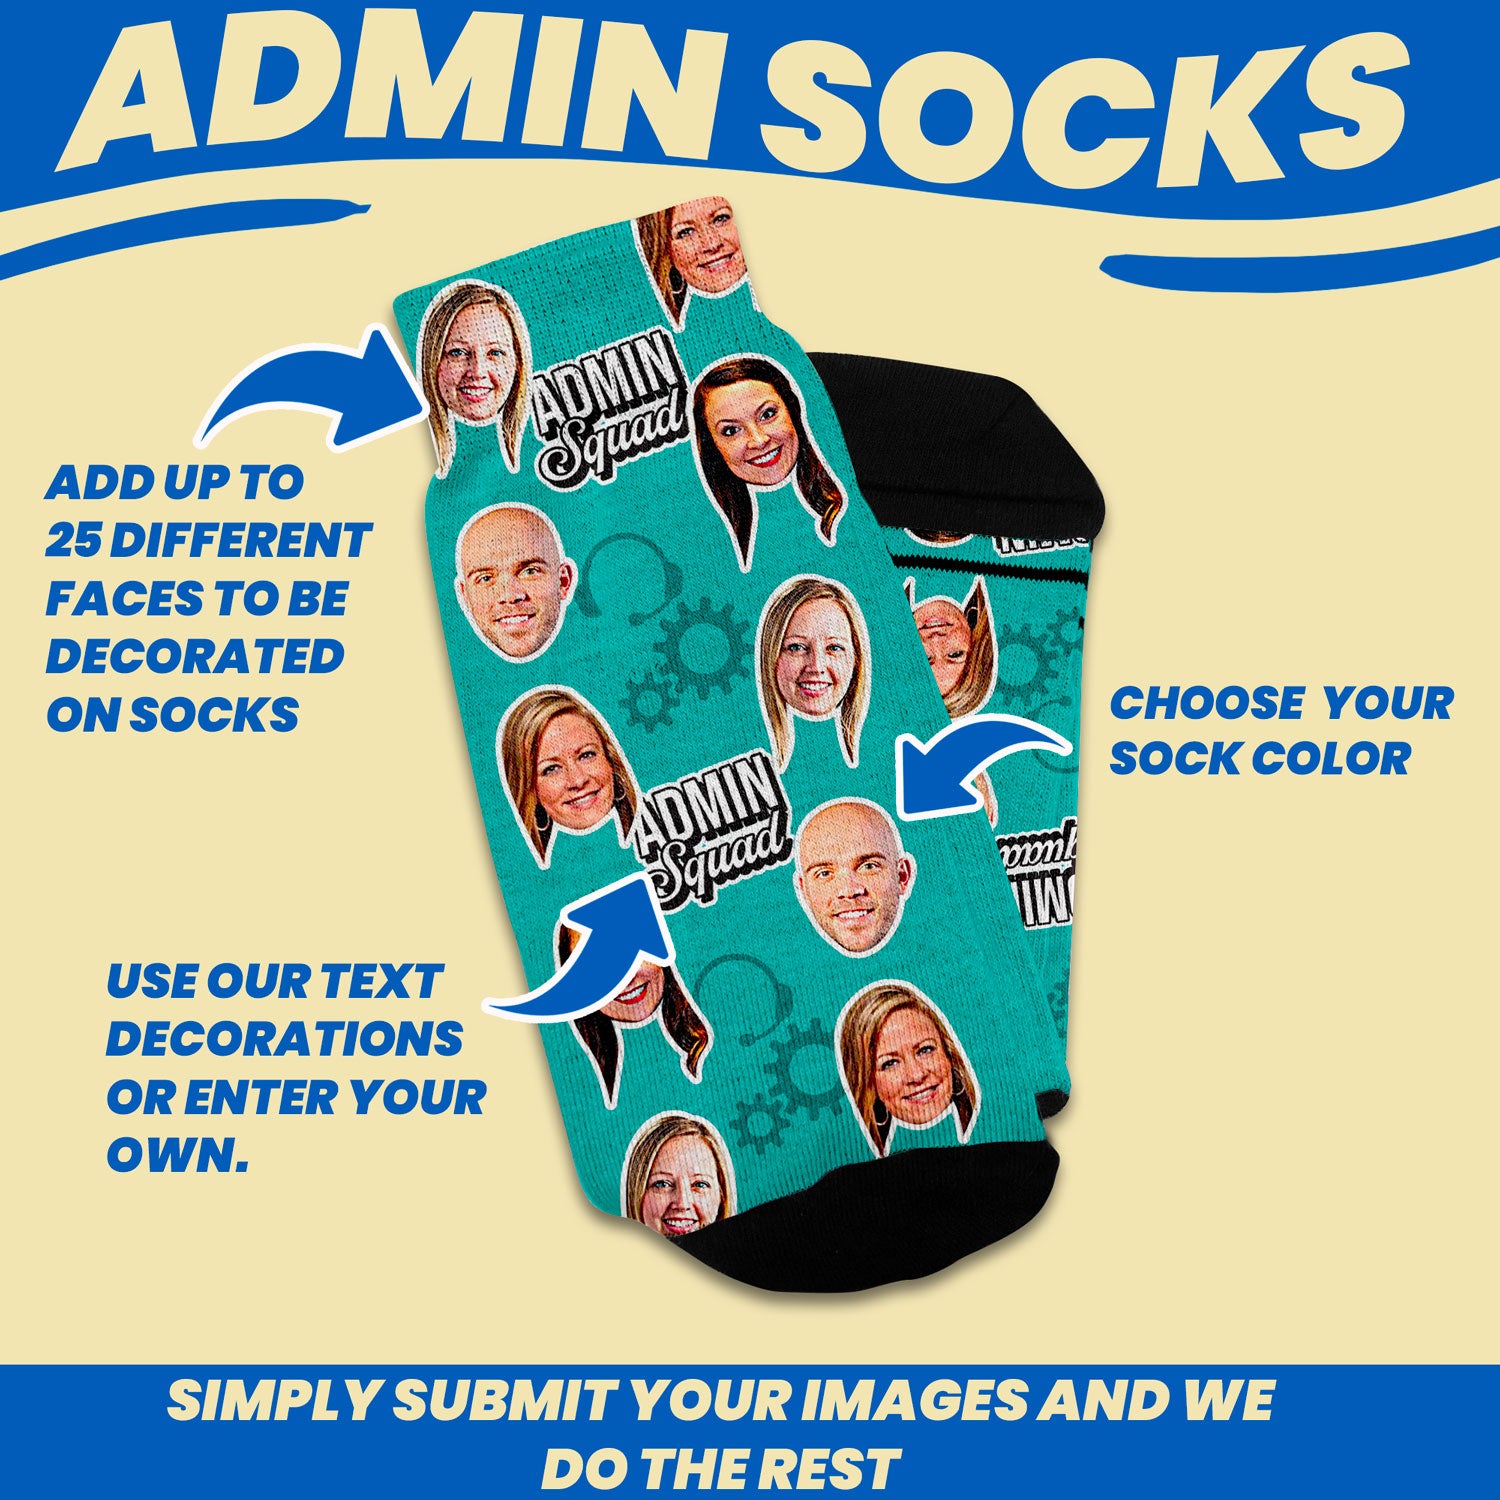 admin assistant gifts personalized socks with faces customization features such as 25 different faces to go on socks, text personalization and custom sock color